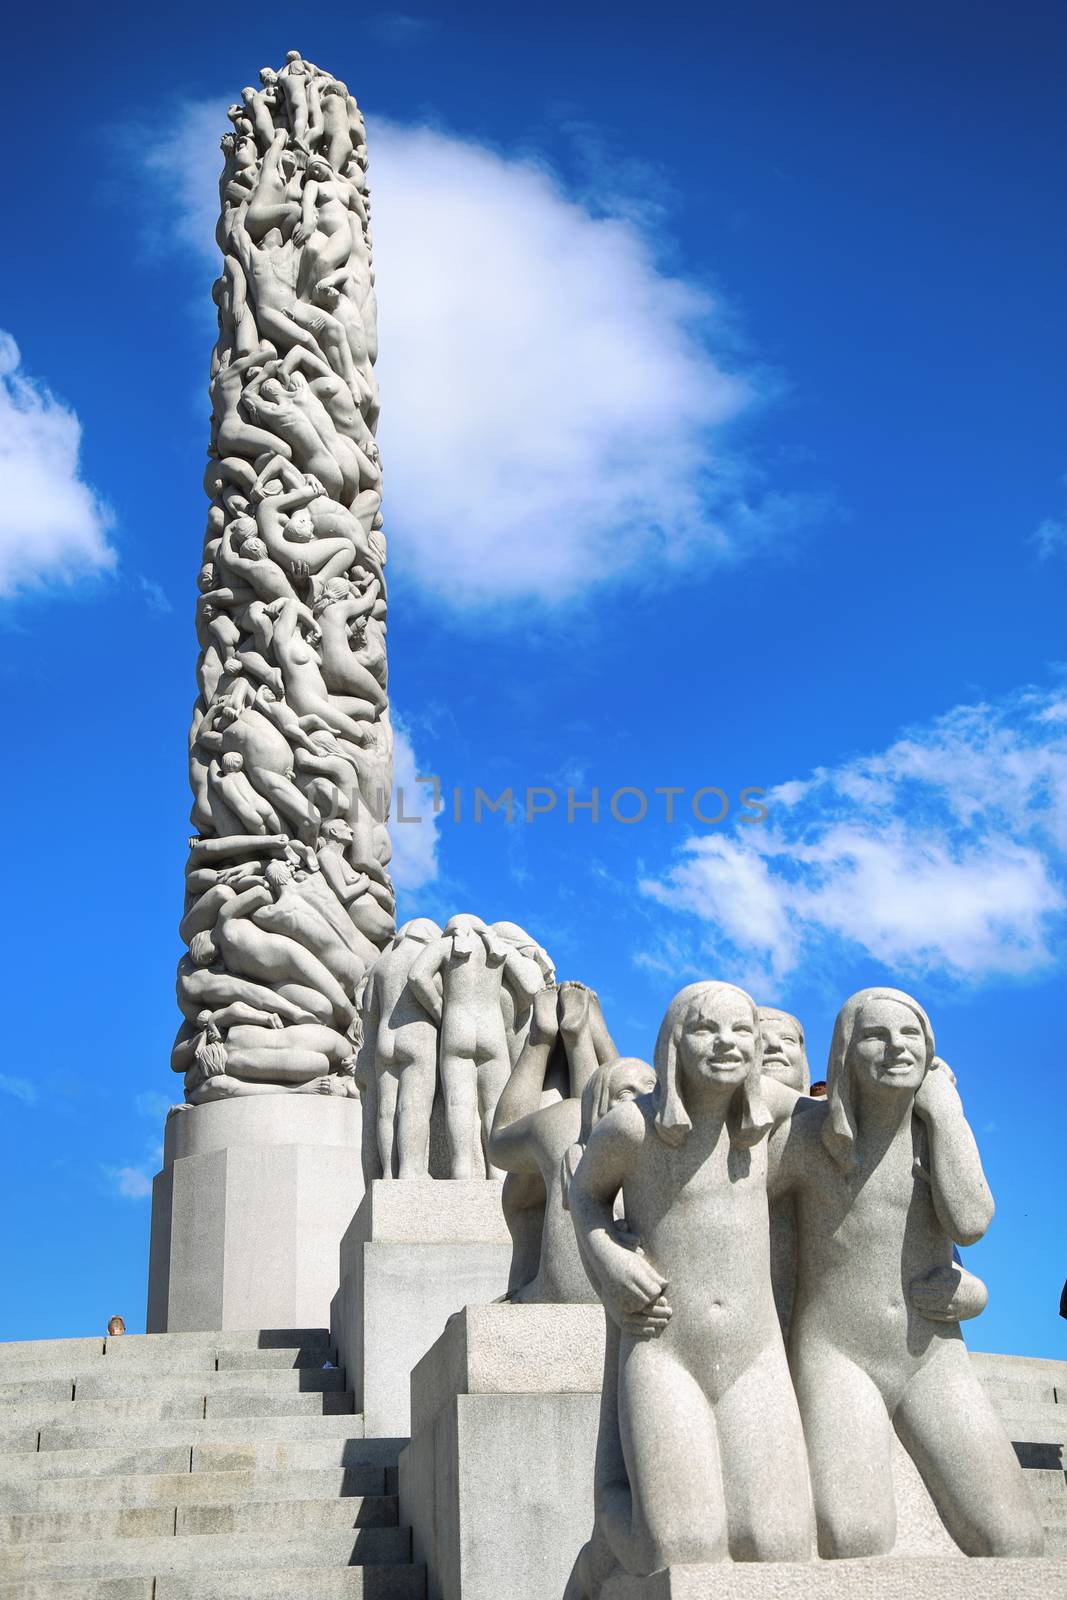 EDITORIAL OSLO, NORWAY - AUGUST 18, 2016: Sculptures at Vigeland by vladacanon